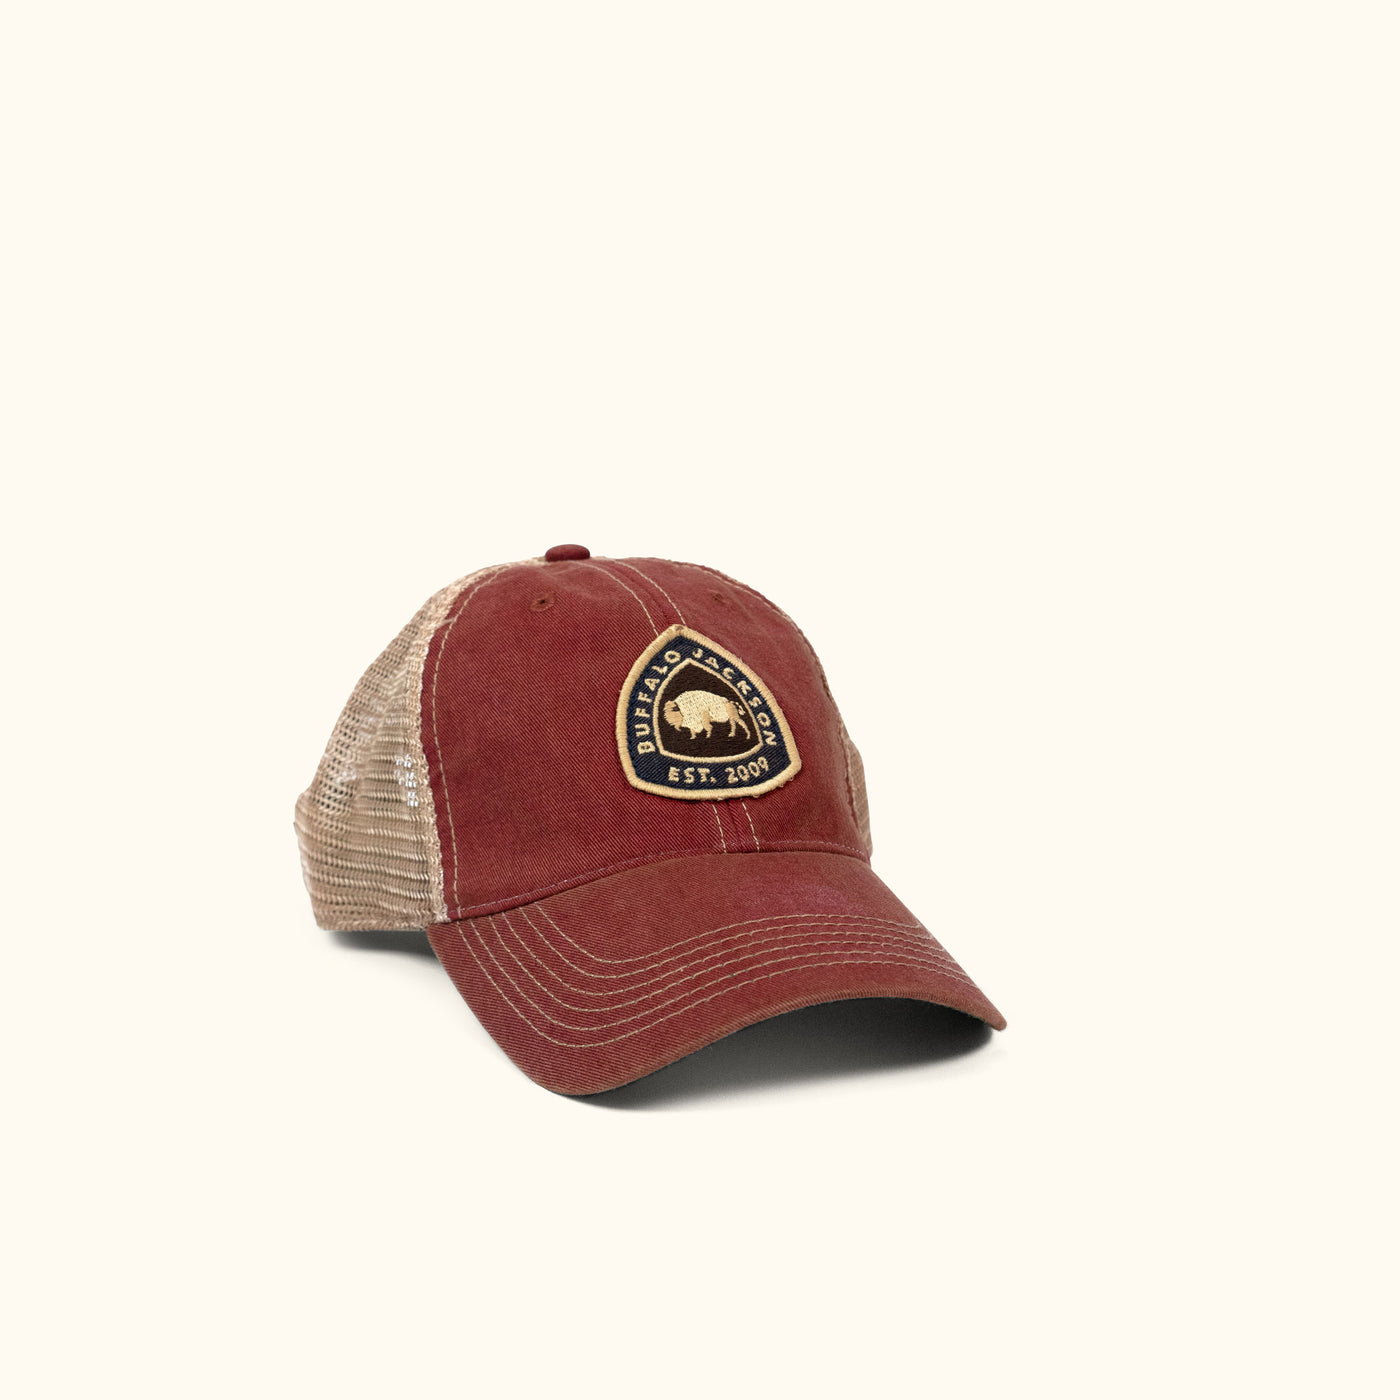 Buffalo Jackson Vintage Trucker Hat | Red and Black